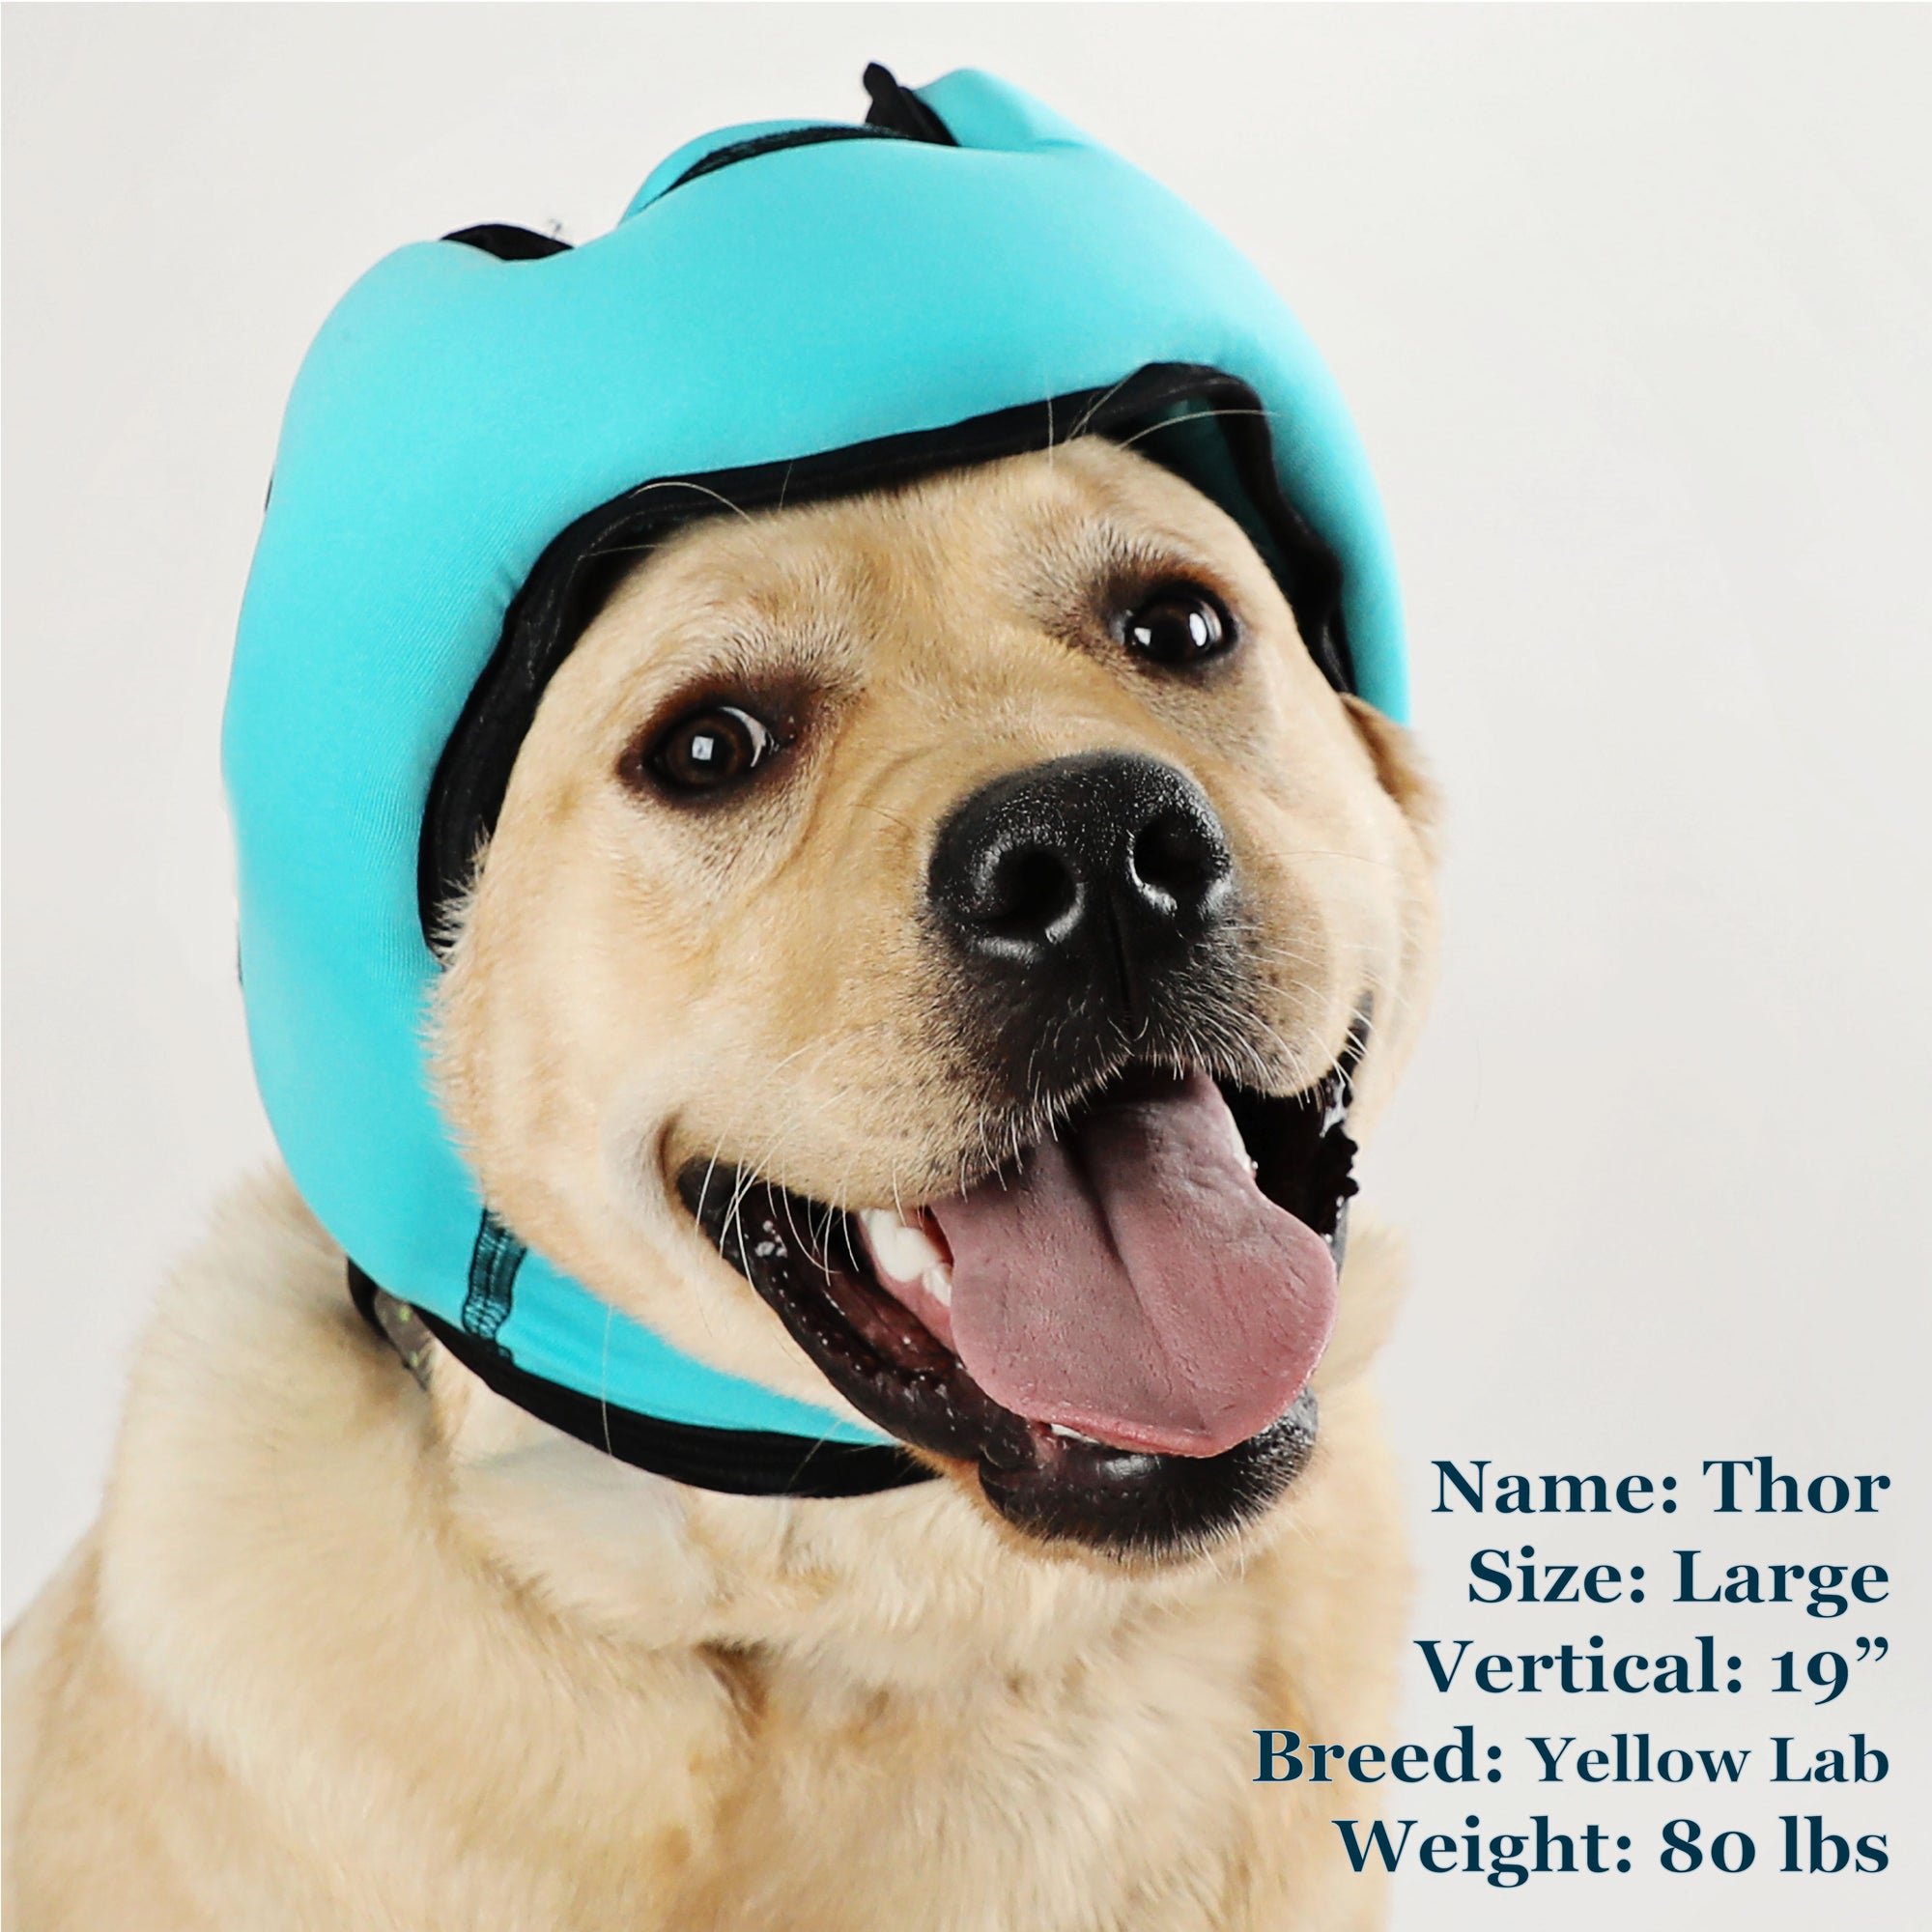 Thor is a Yellow Labrador in a Large Blue PAWNIX Noise Cancelling Headset for dogs